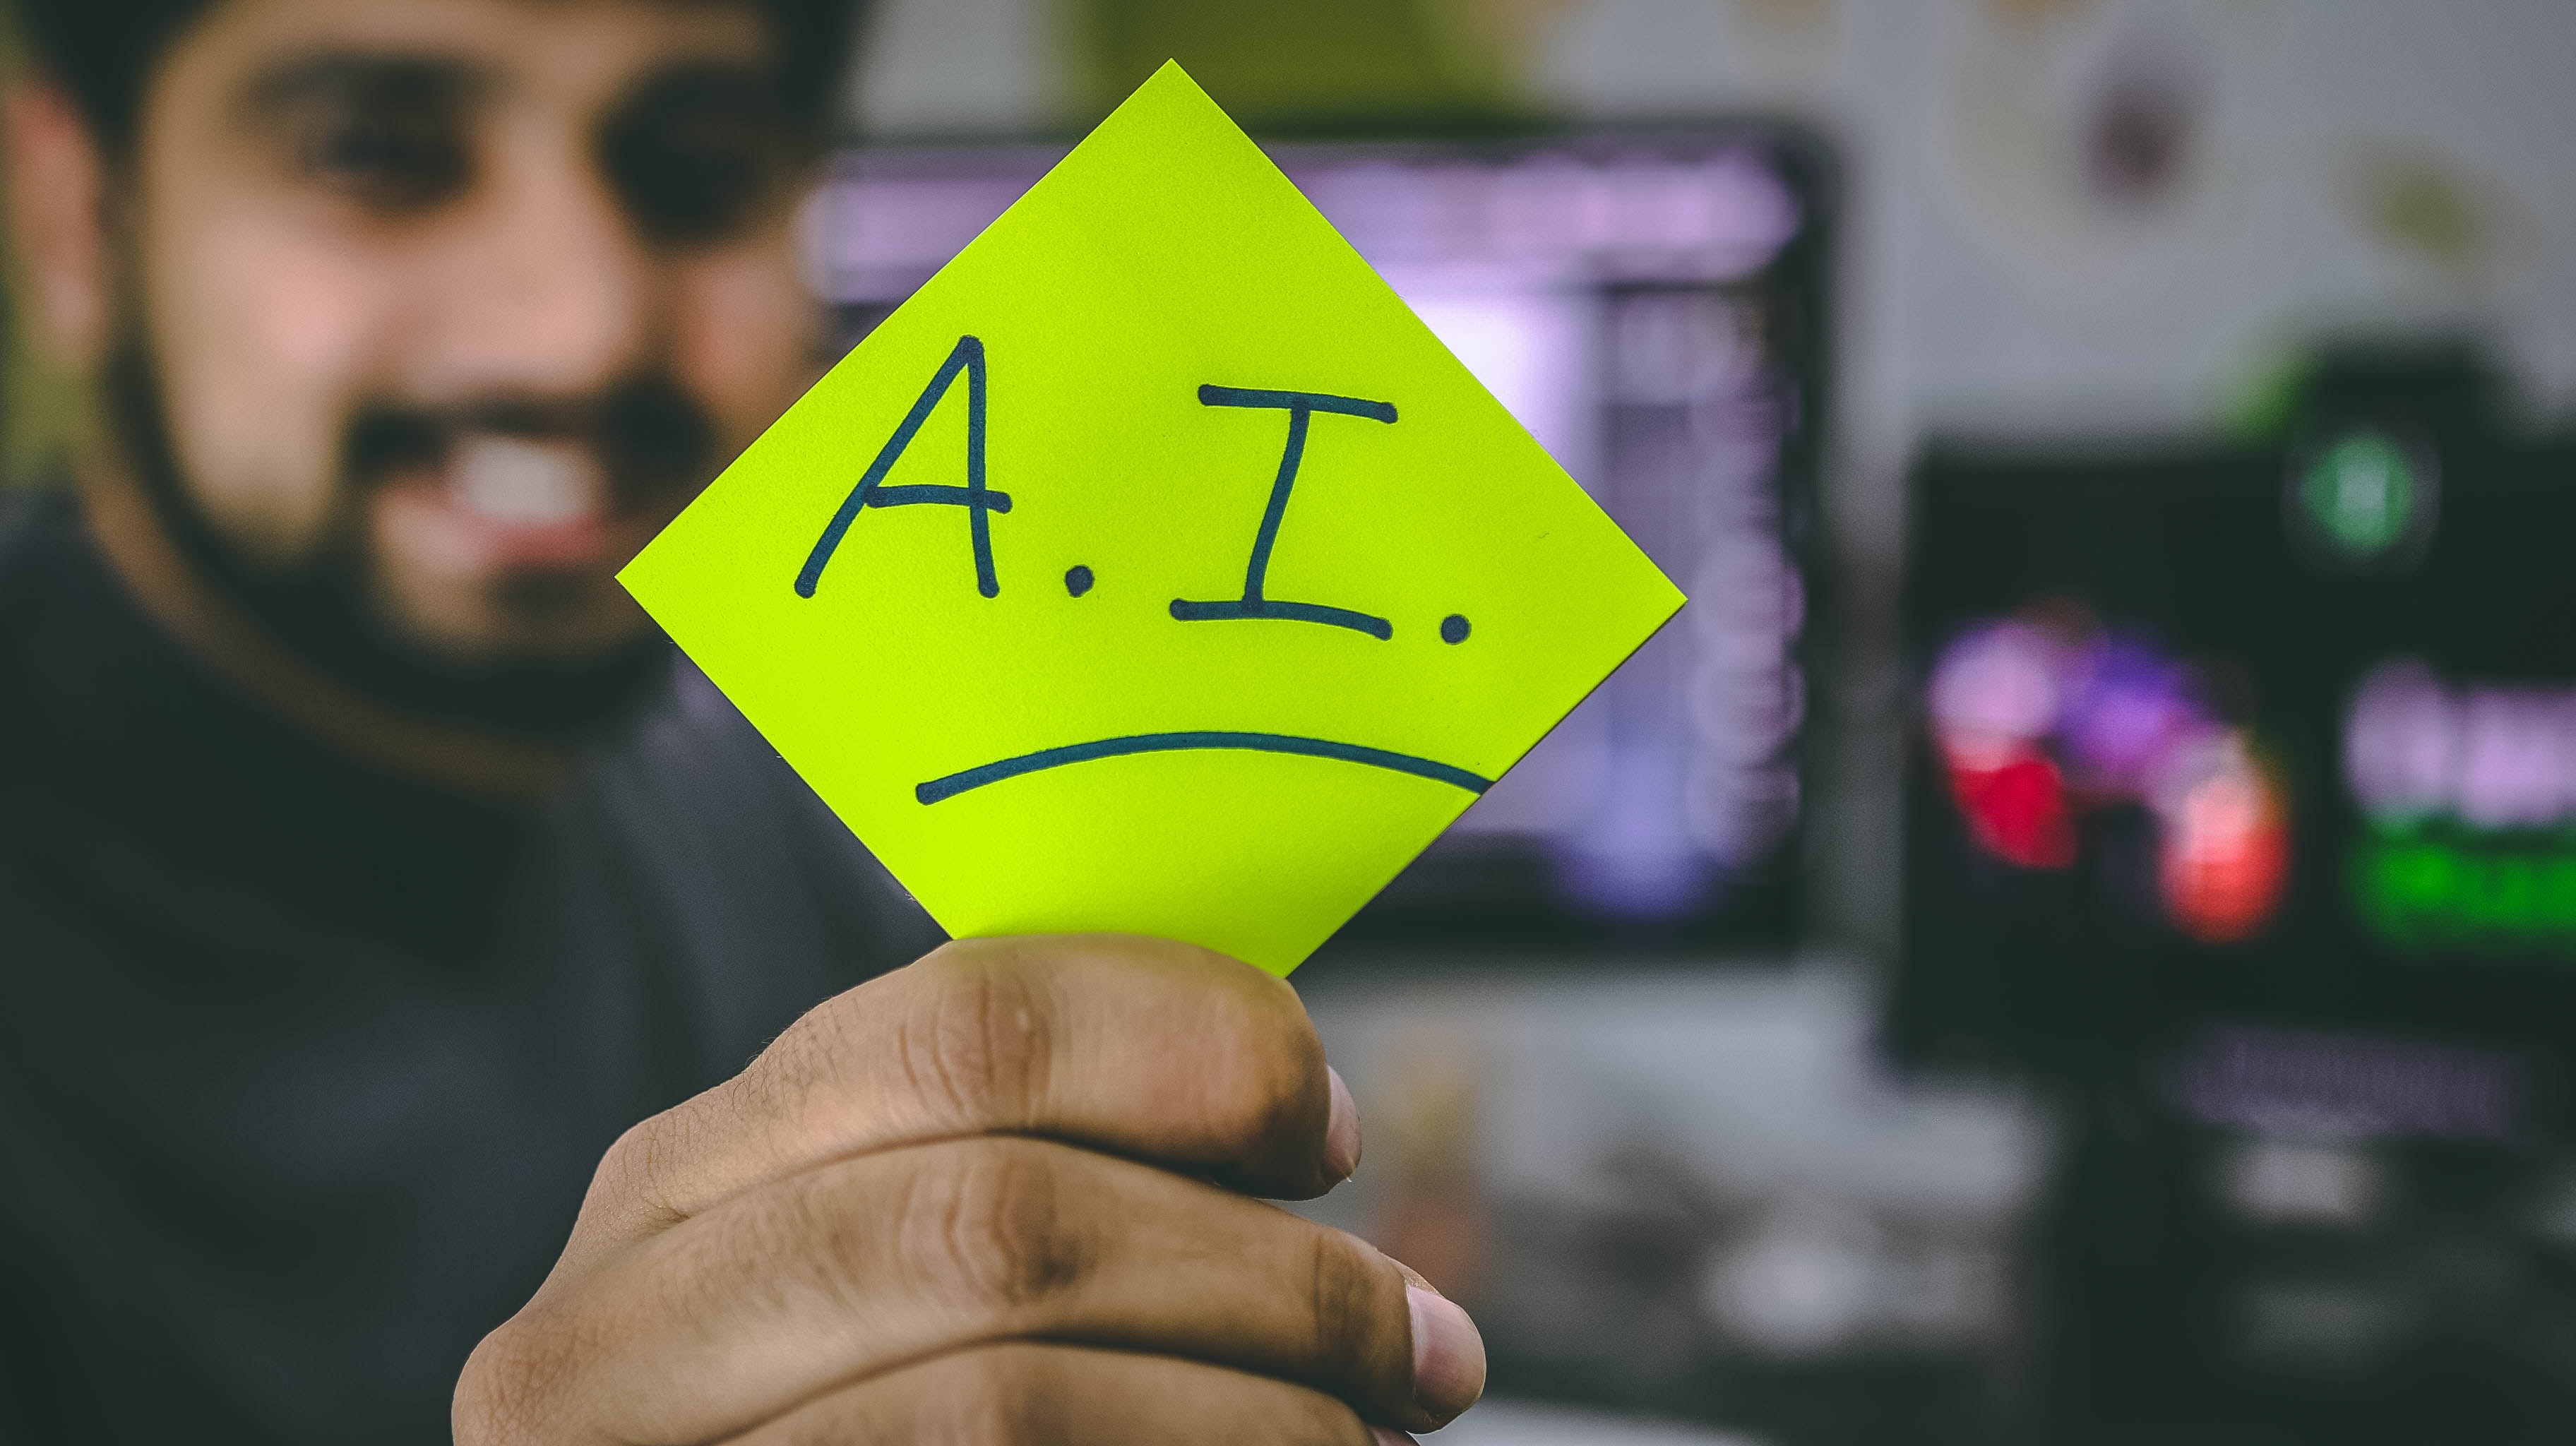 Photograph of a computer programmer holding up a sticky note that says "A.I."